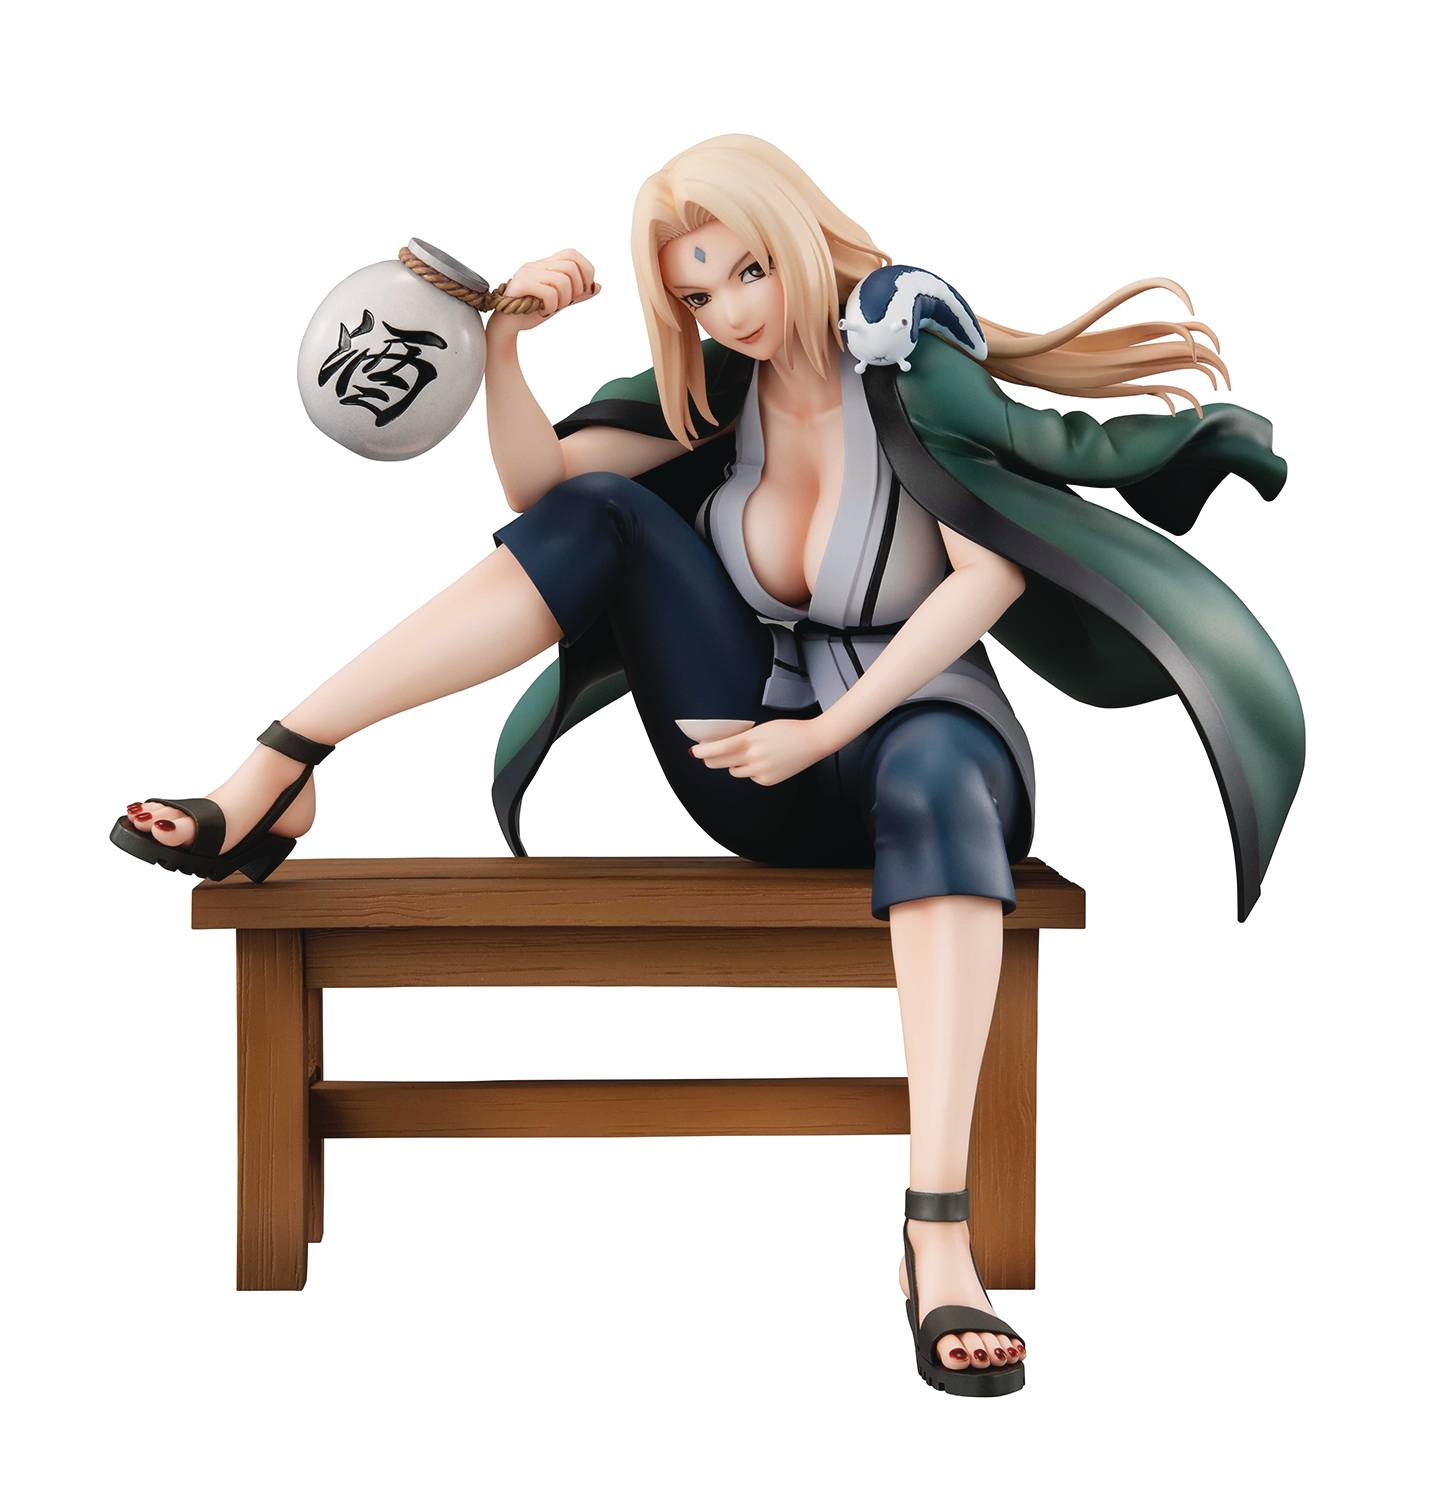 Tsunade features a smiling expression and flowing hair, wearing a familiar ...